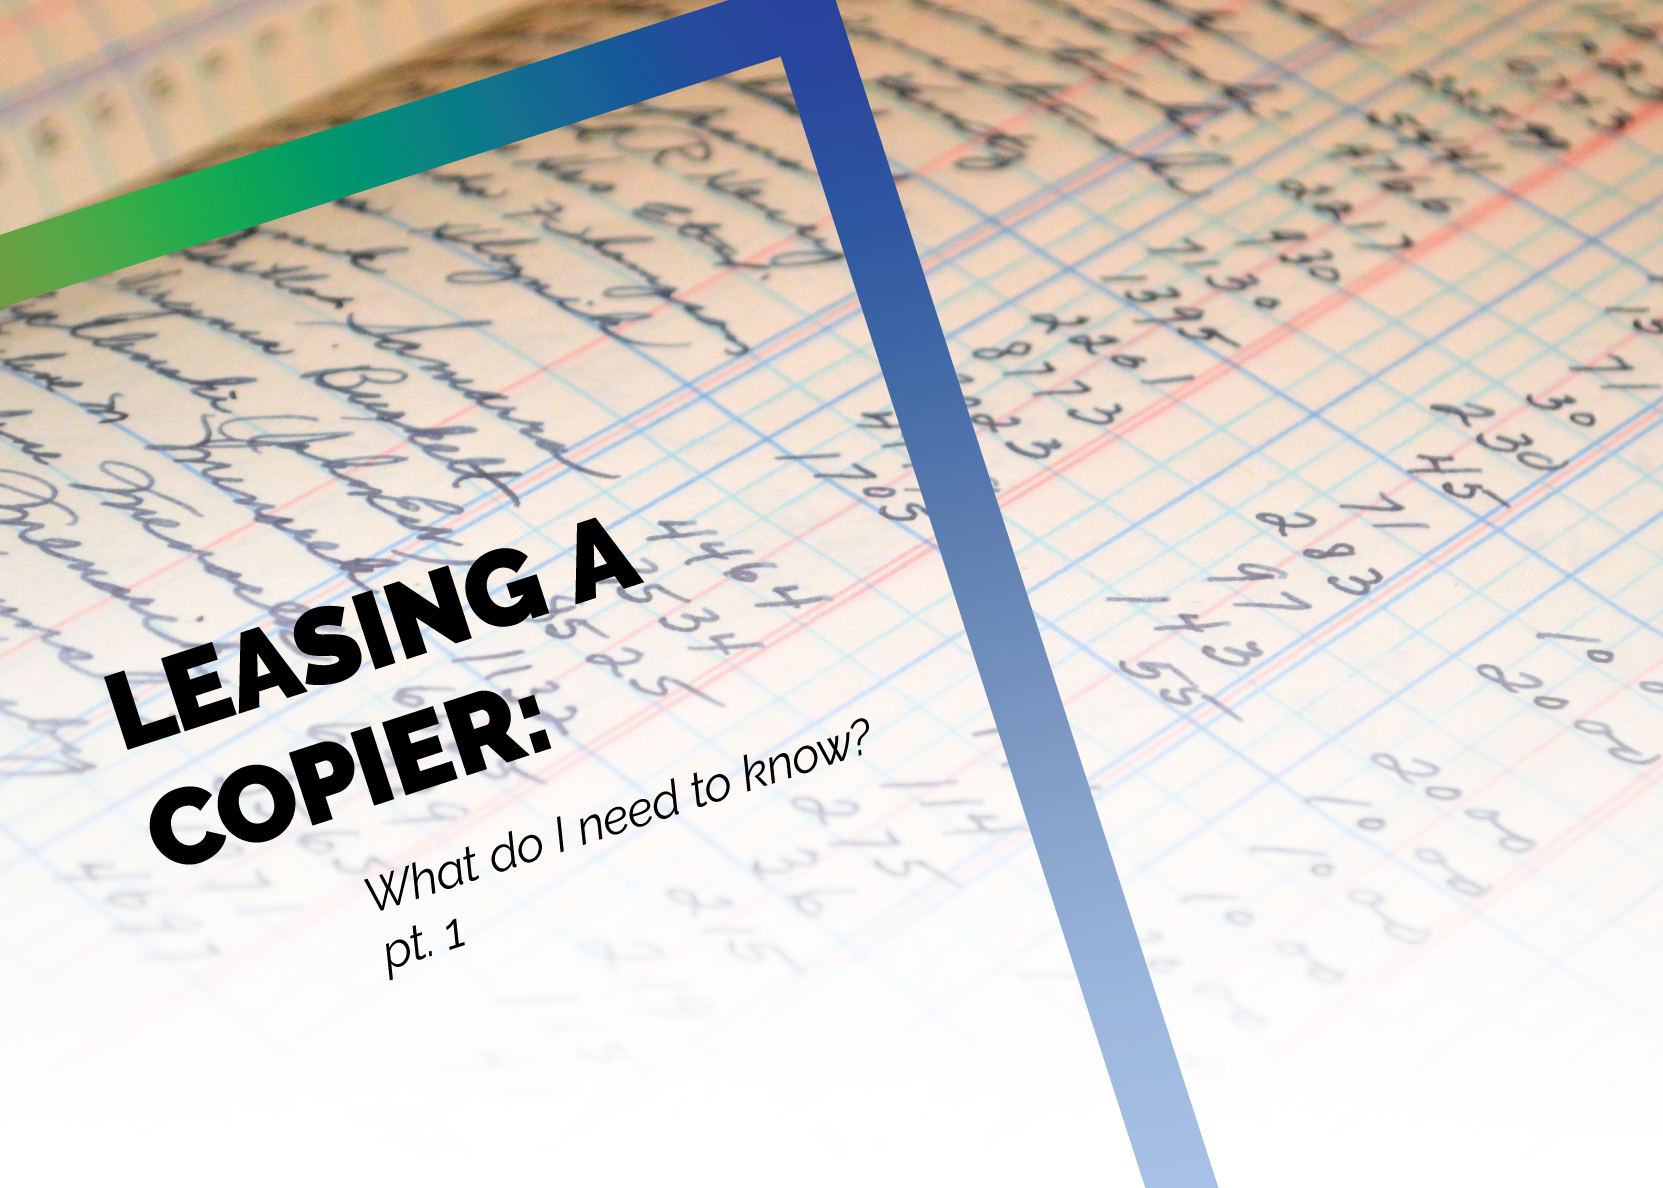 What Do I Need to Know About Leasing a Copier? Part 1